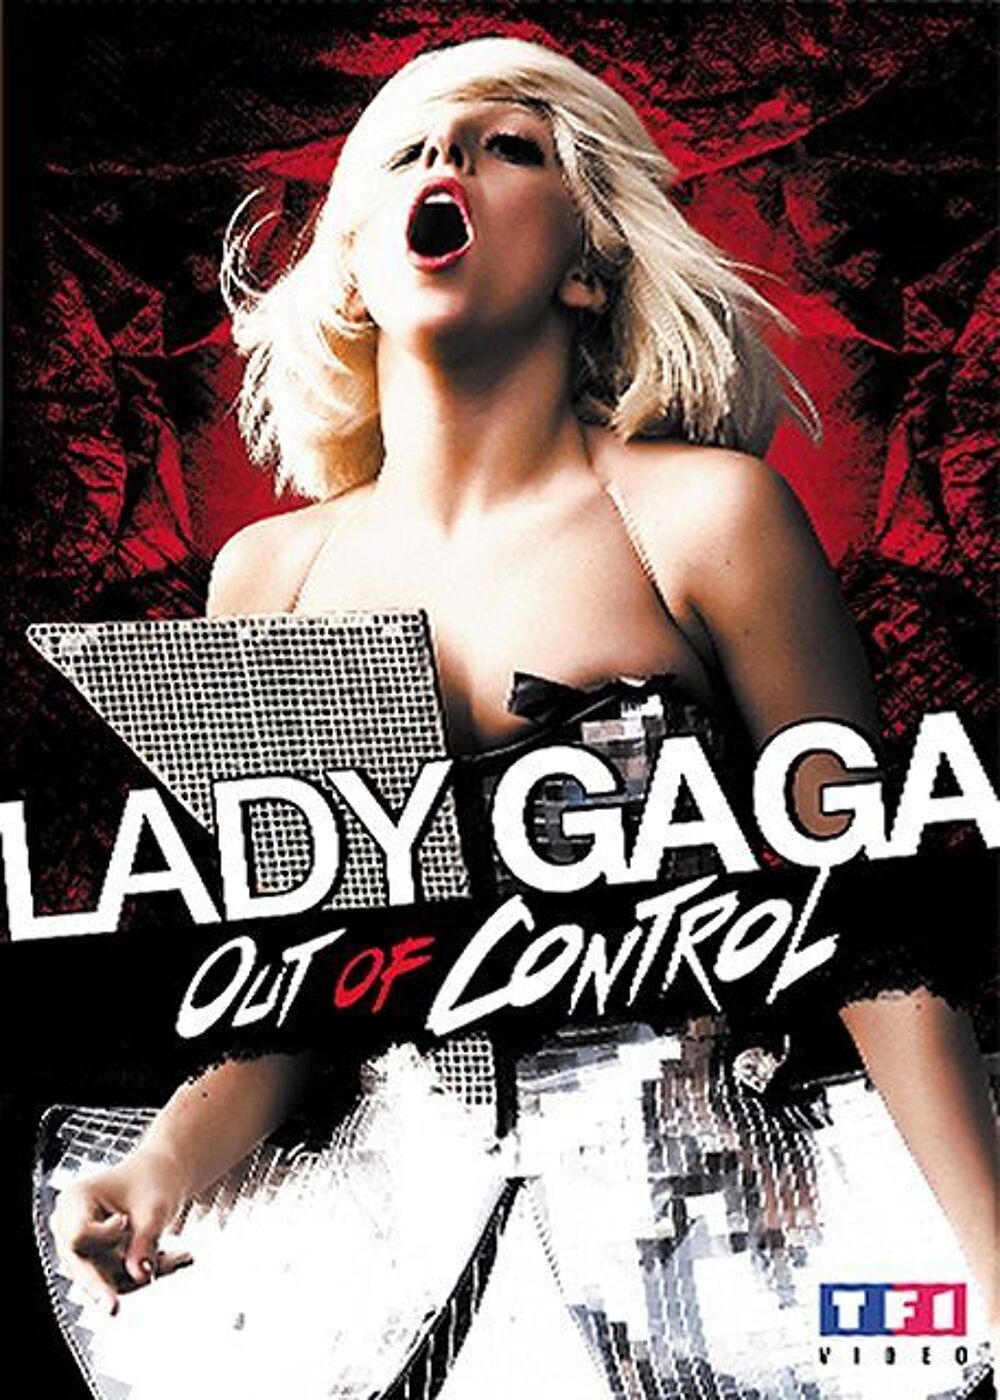 Lady Gaga Out of Control DVD et blu-ray